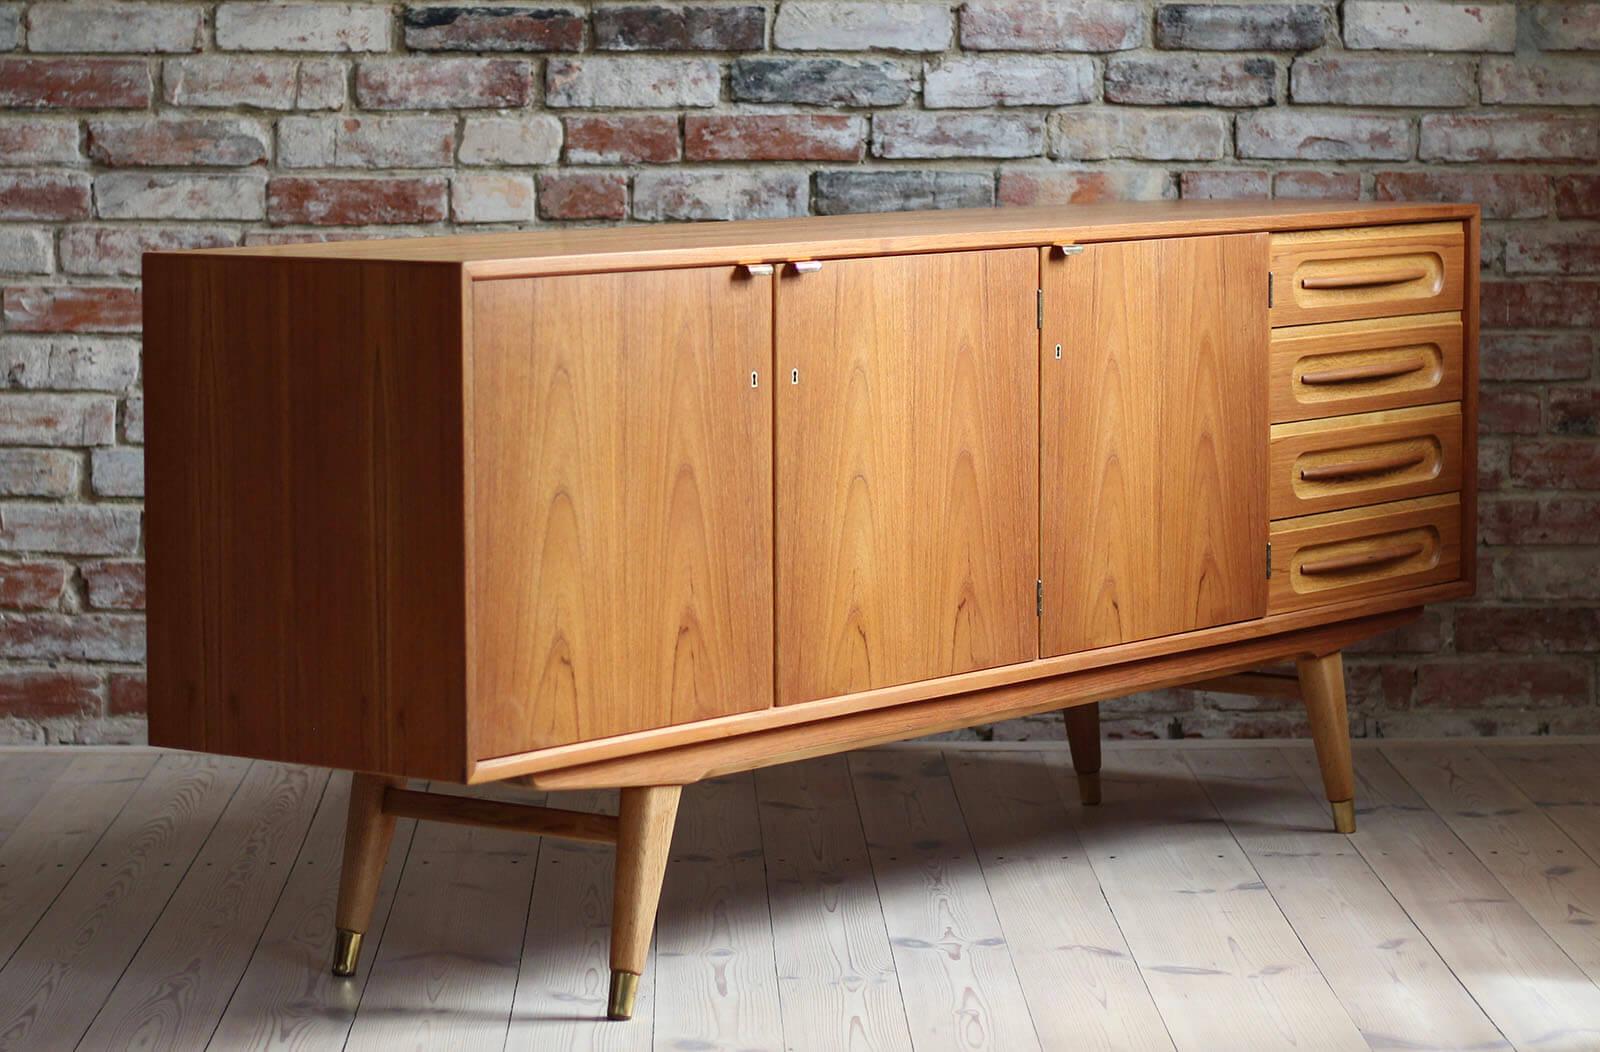 Midcentury Danish Sideboard, Teak Wood and Brass Details, 1960s In Good Condition In Wrocław, Poland